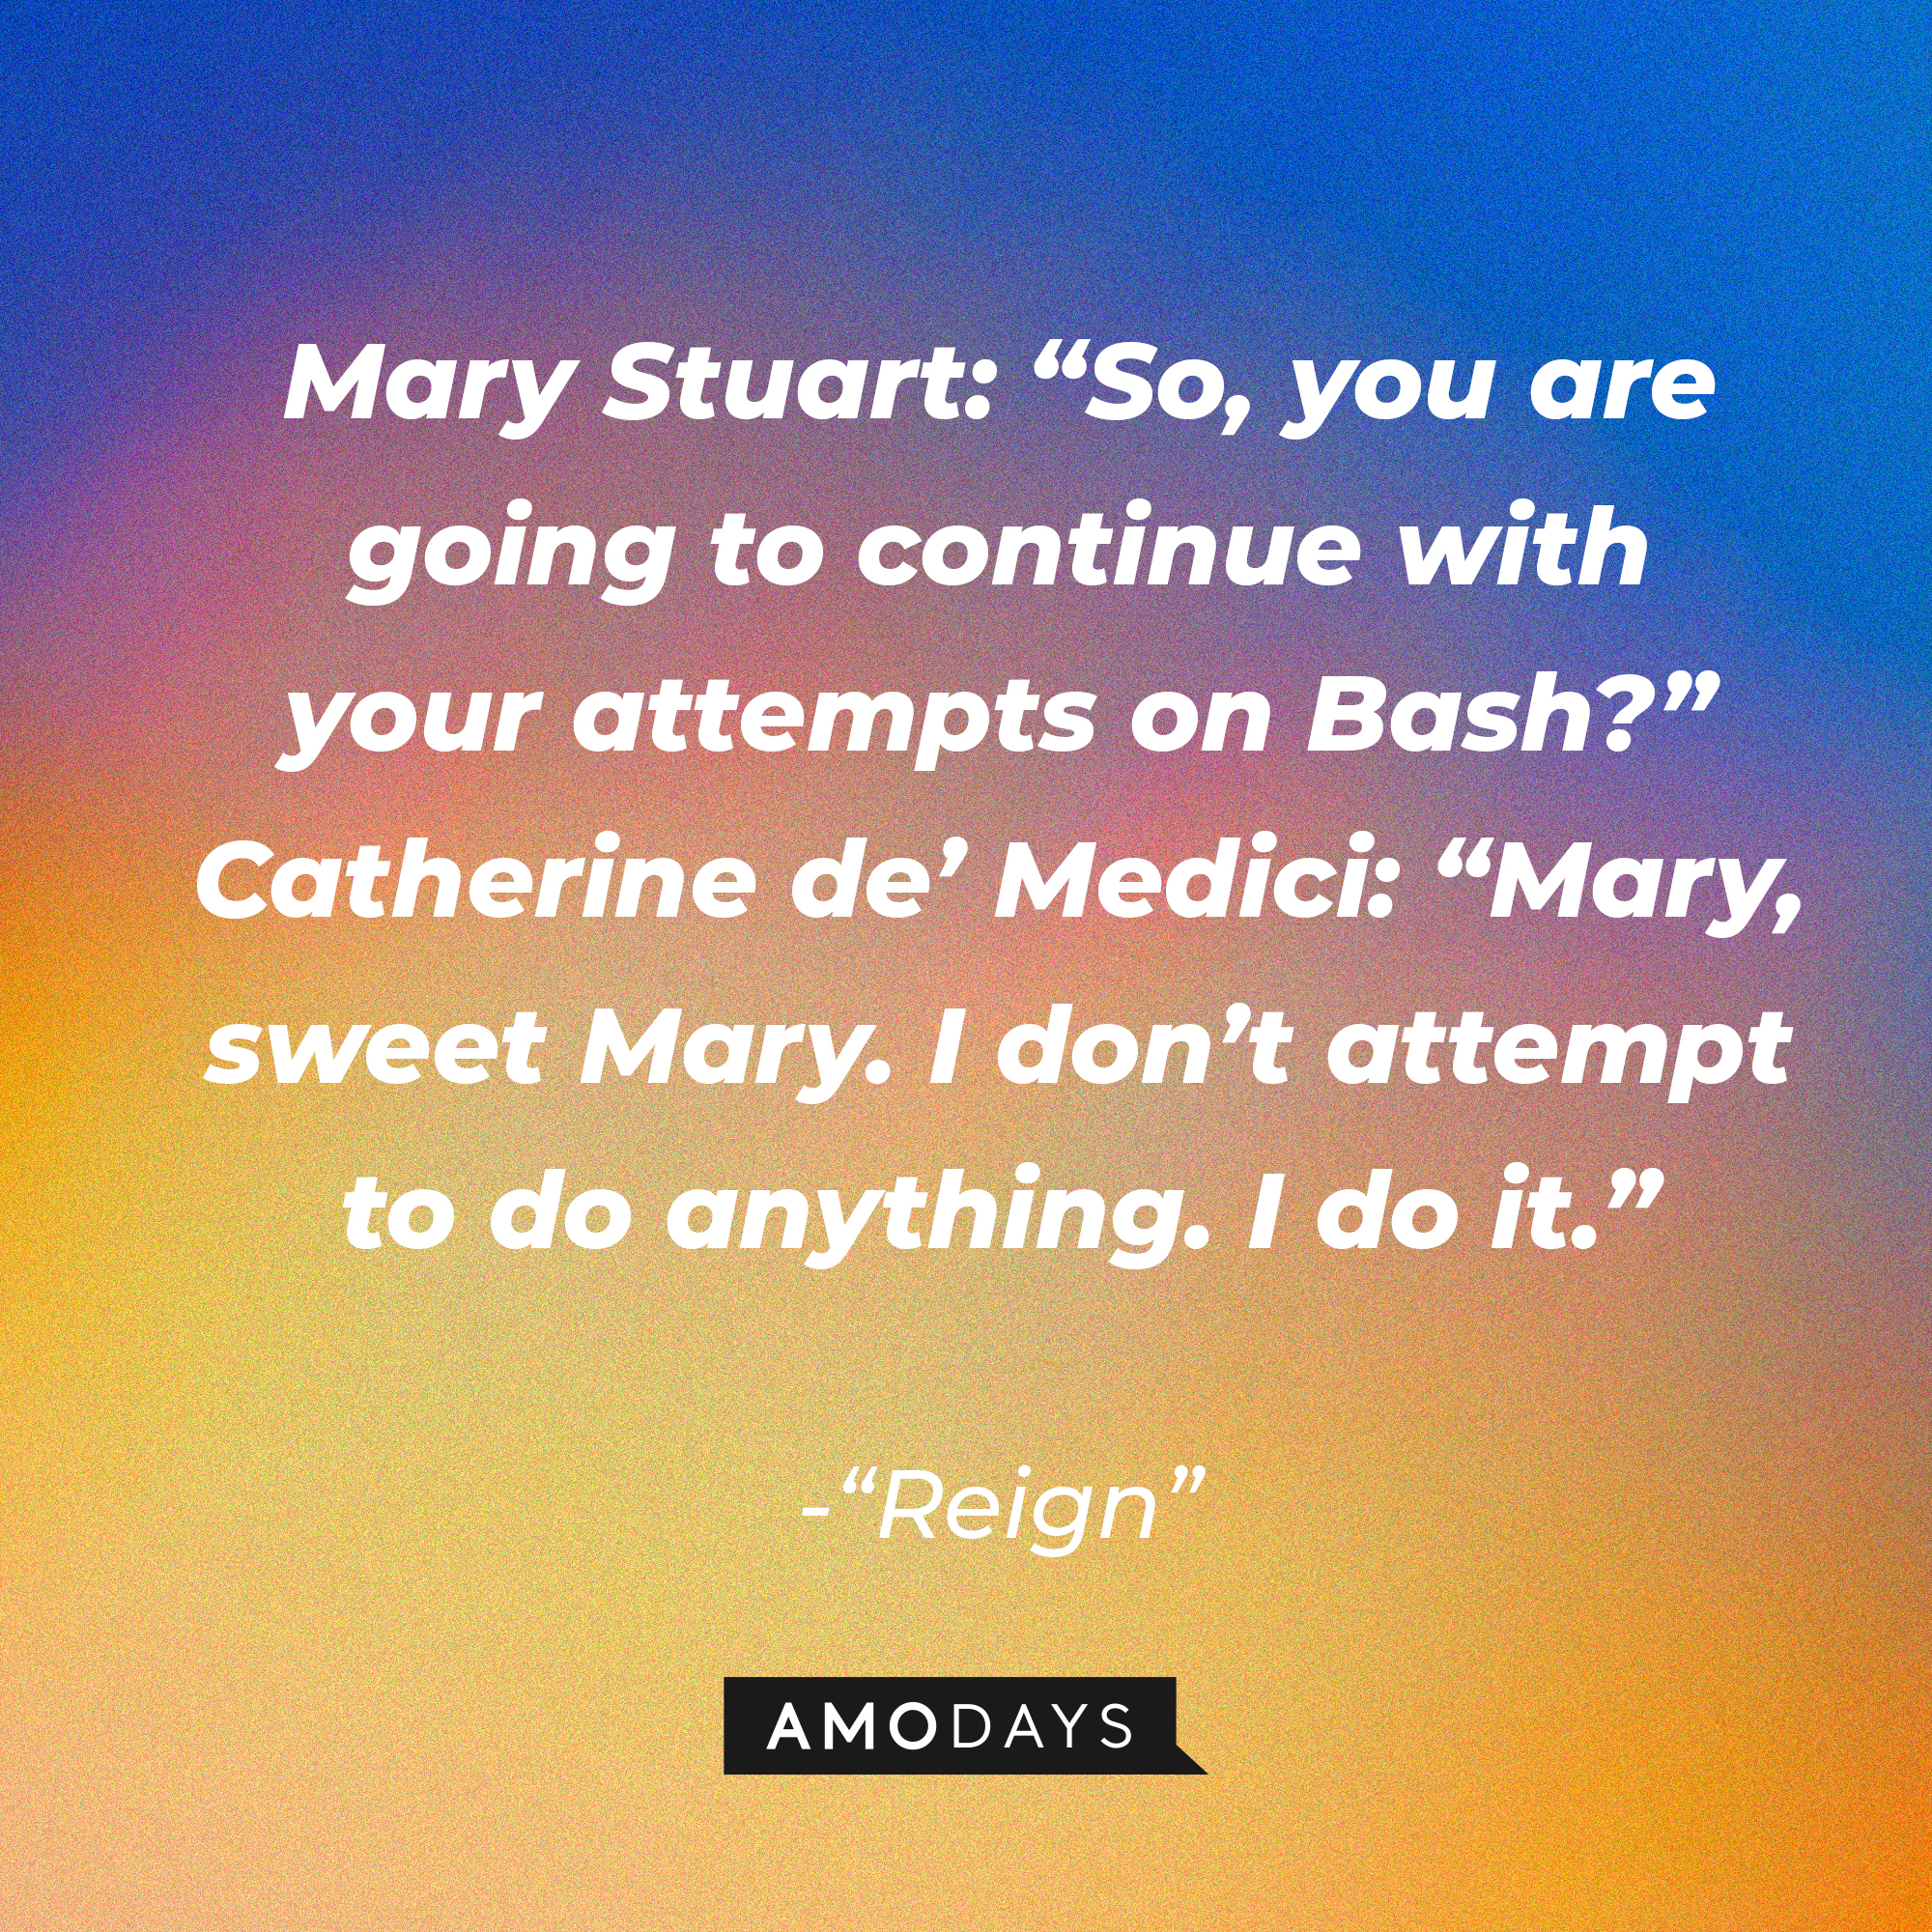 Mary Stuart and Catherine de's Medici's conversation in "Reign:" "Mary Stuart: So, you are going to continue with your attempts on Bash? Catherine de’ Medici: Mary, sweet Mary. I don’t attempt to do anything. I do it.” | Source: Amodays